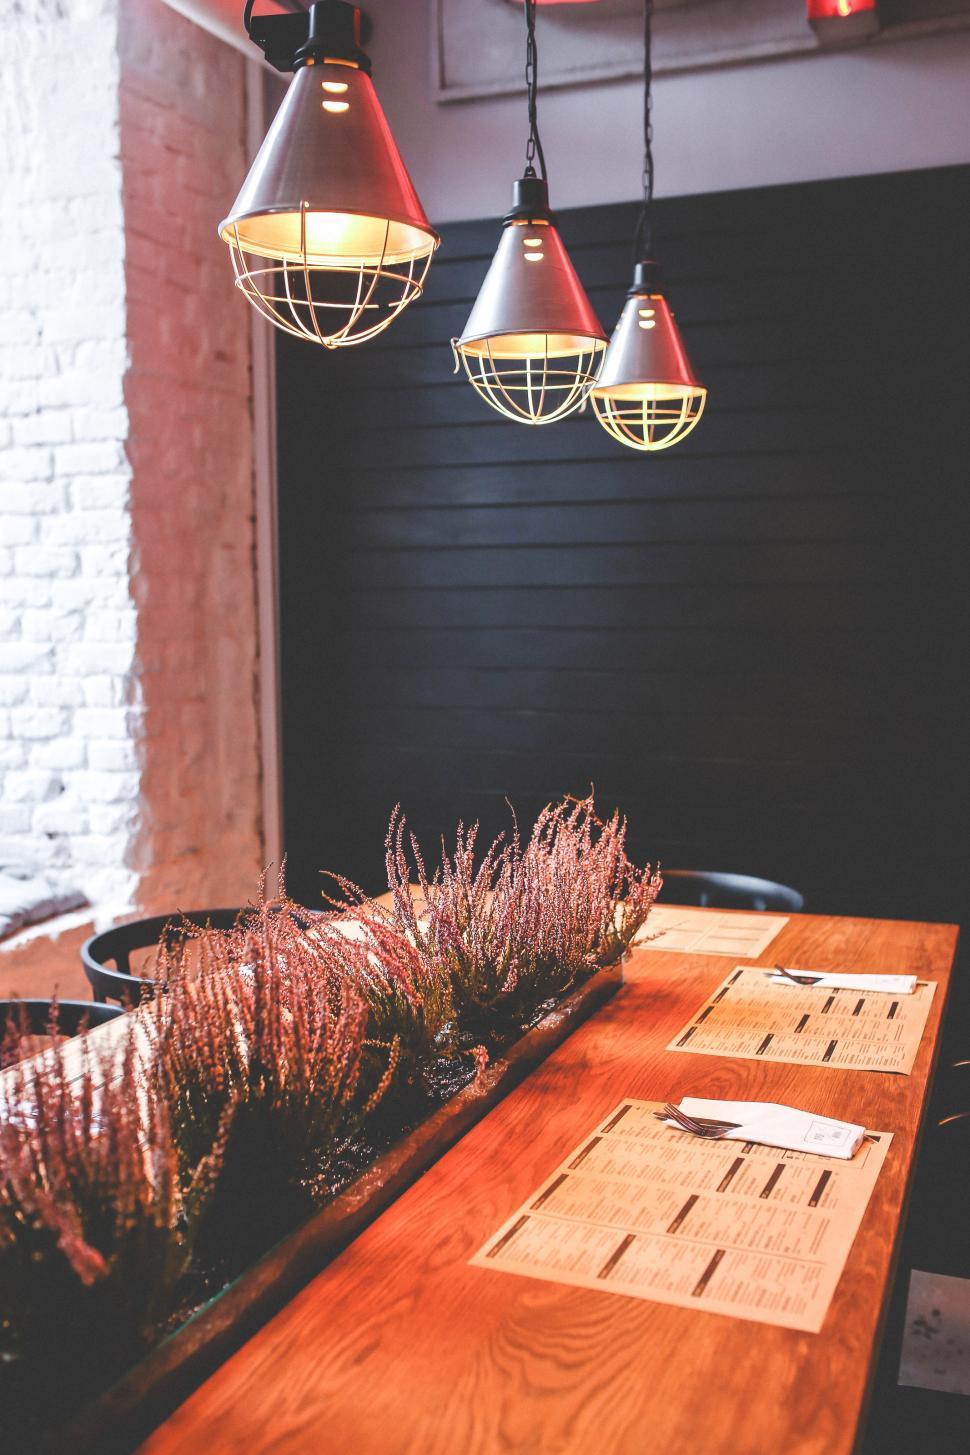 Free Image of Wooden Table With Plant and Hanging Lights 